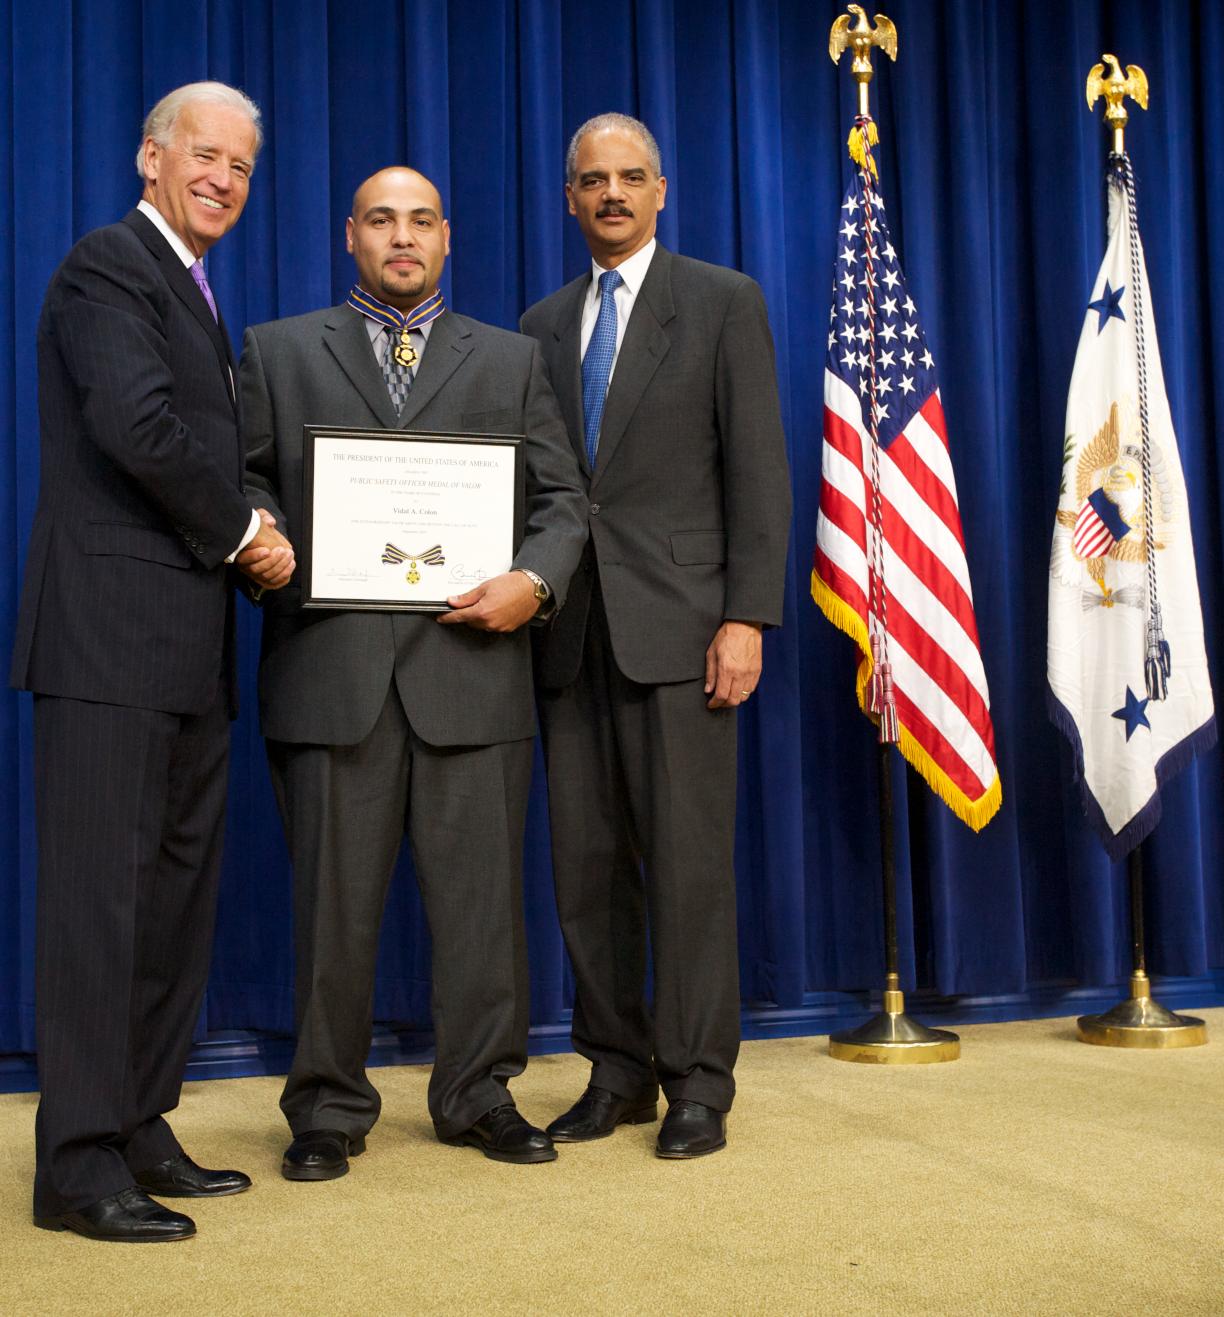 Three men wearing suits, standing in front of flags on a stage, and smiling at the camera. The man in the middle is holding a Medal of Valor award plaque.